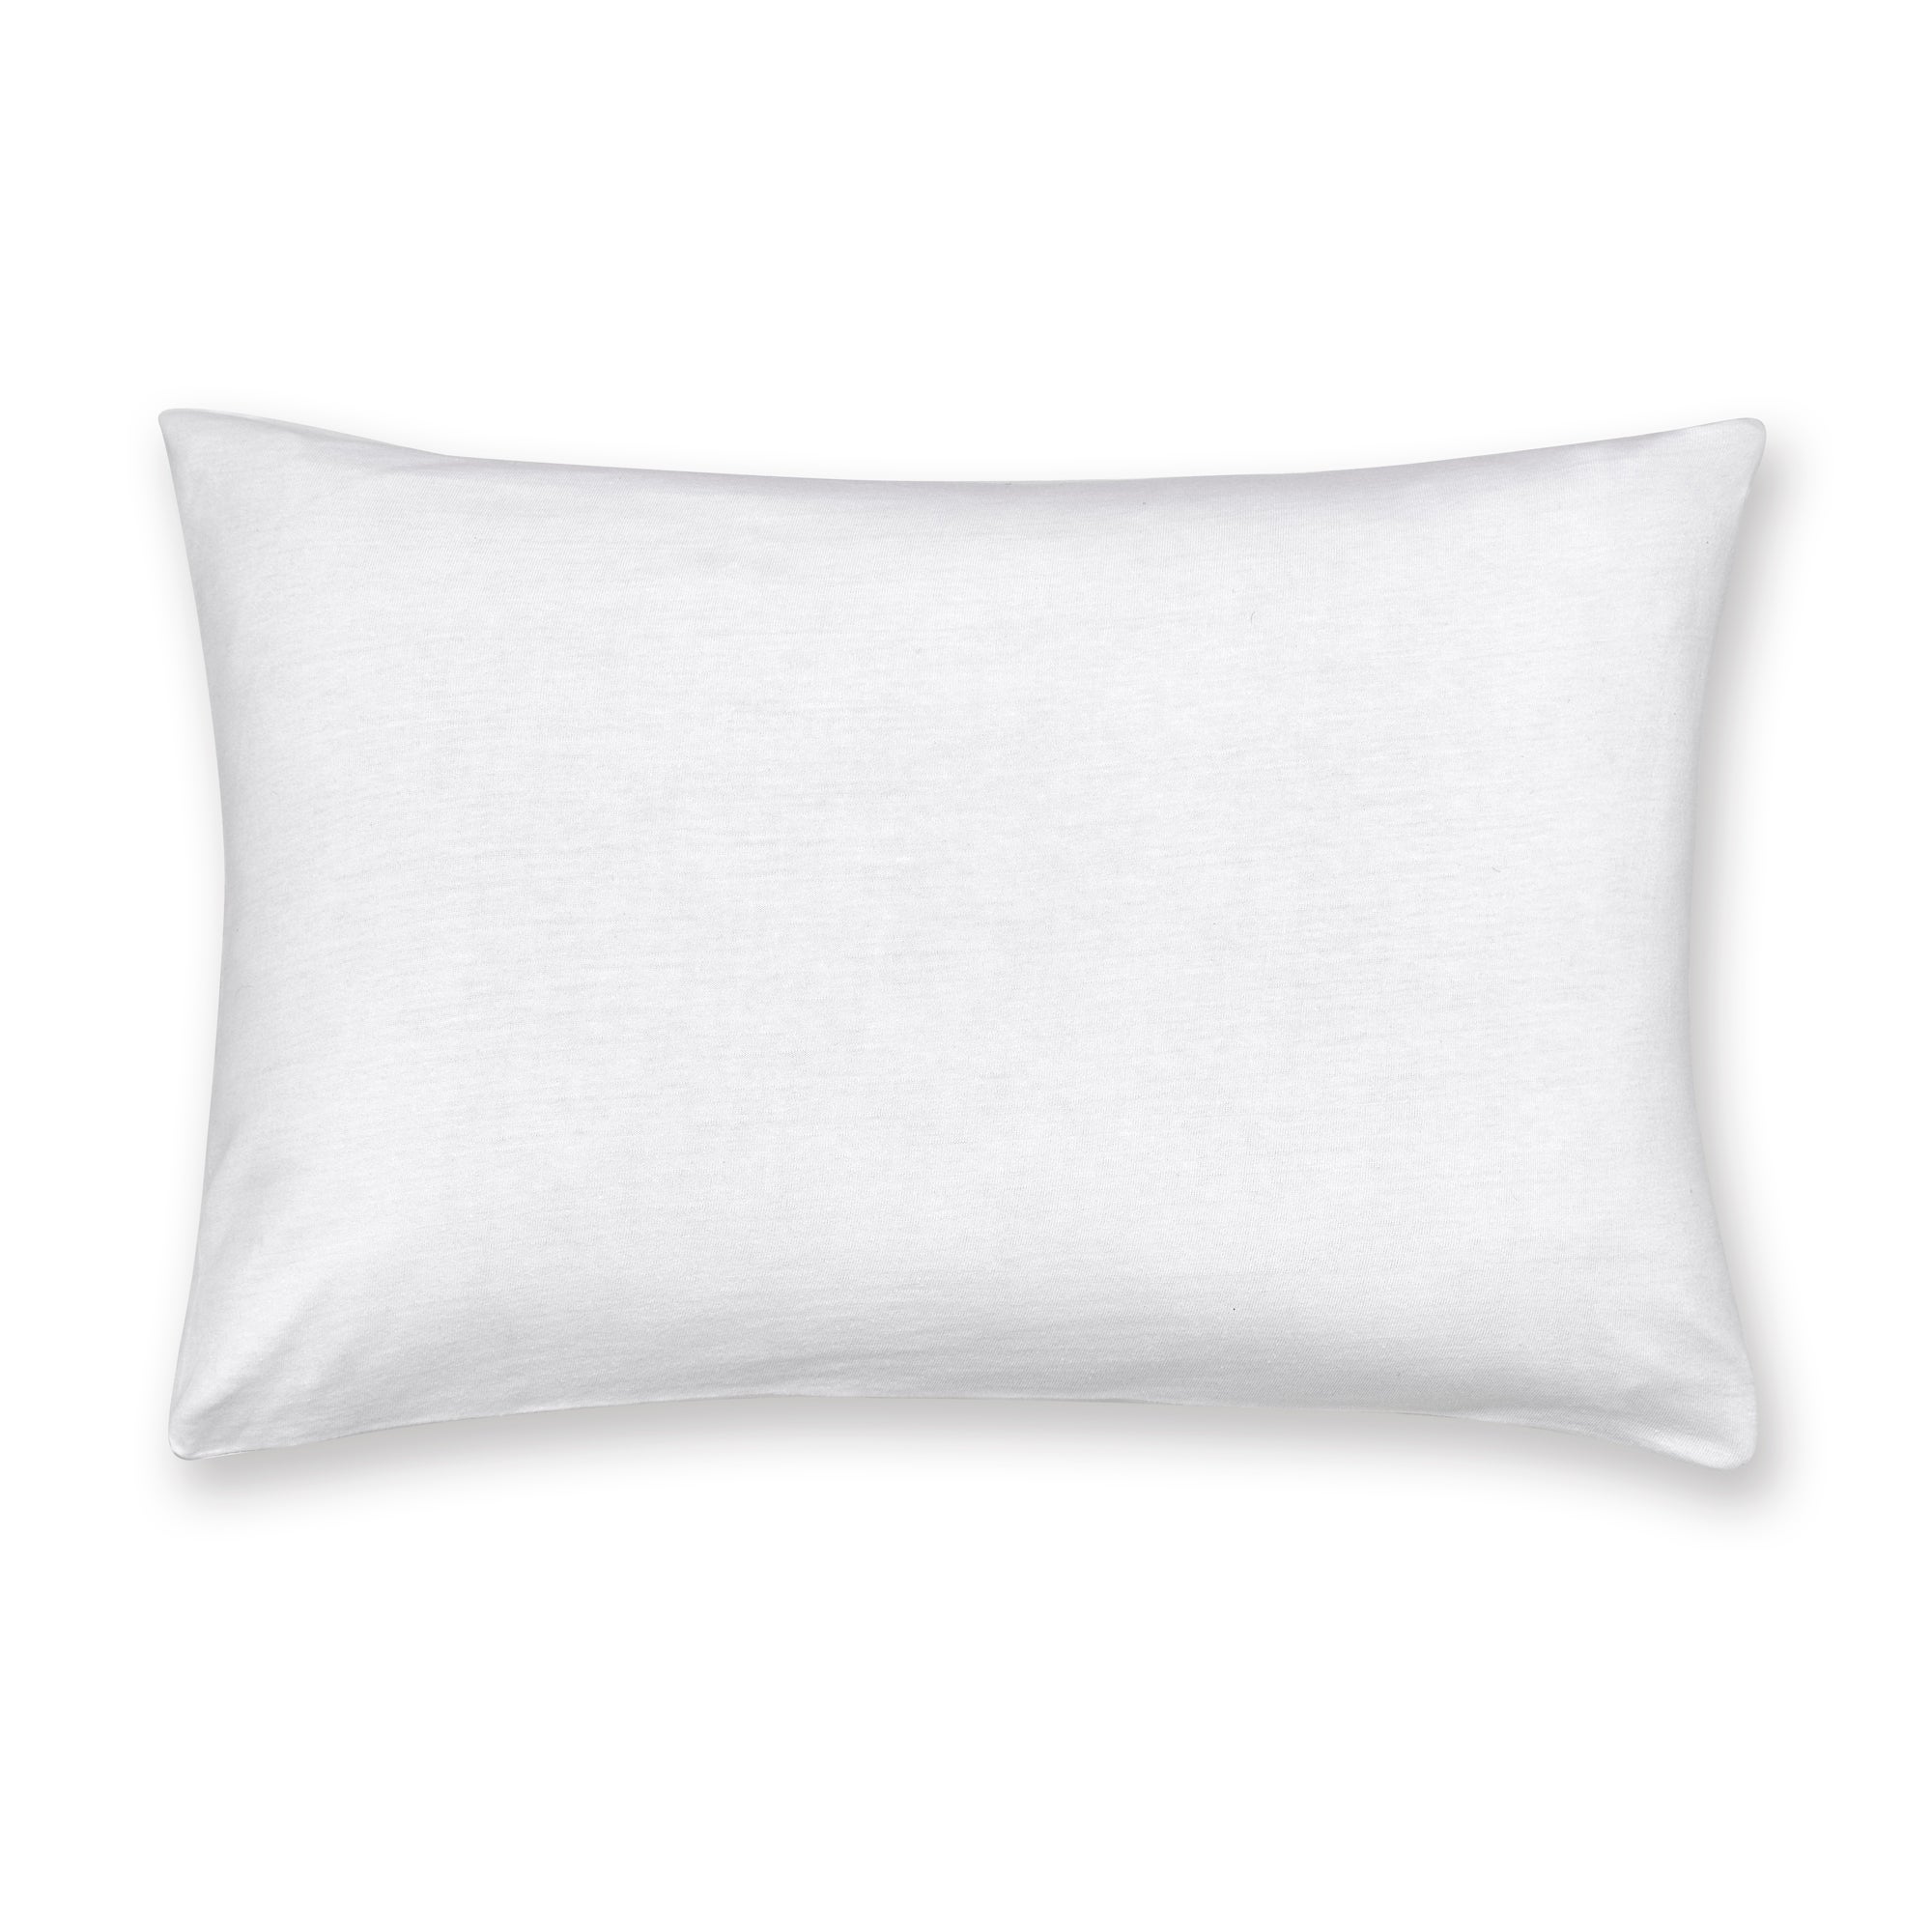 Jersey White 100% Cotton Cot Bed / Toddler Pillowcase | Dunelm